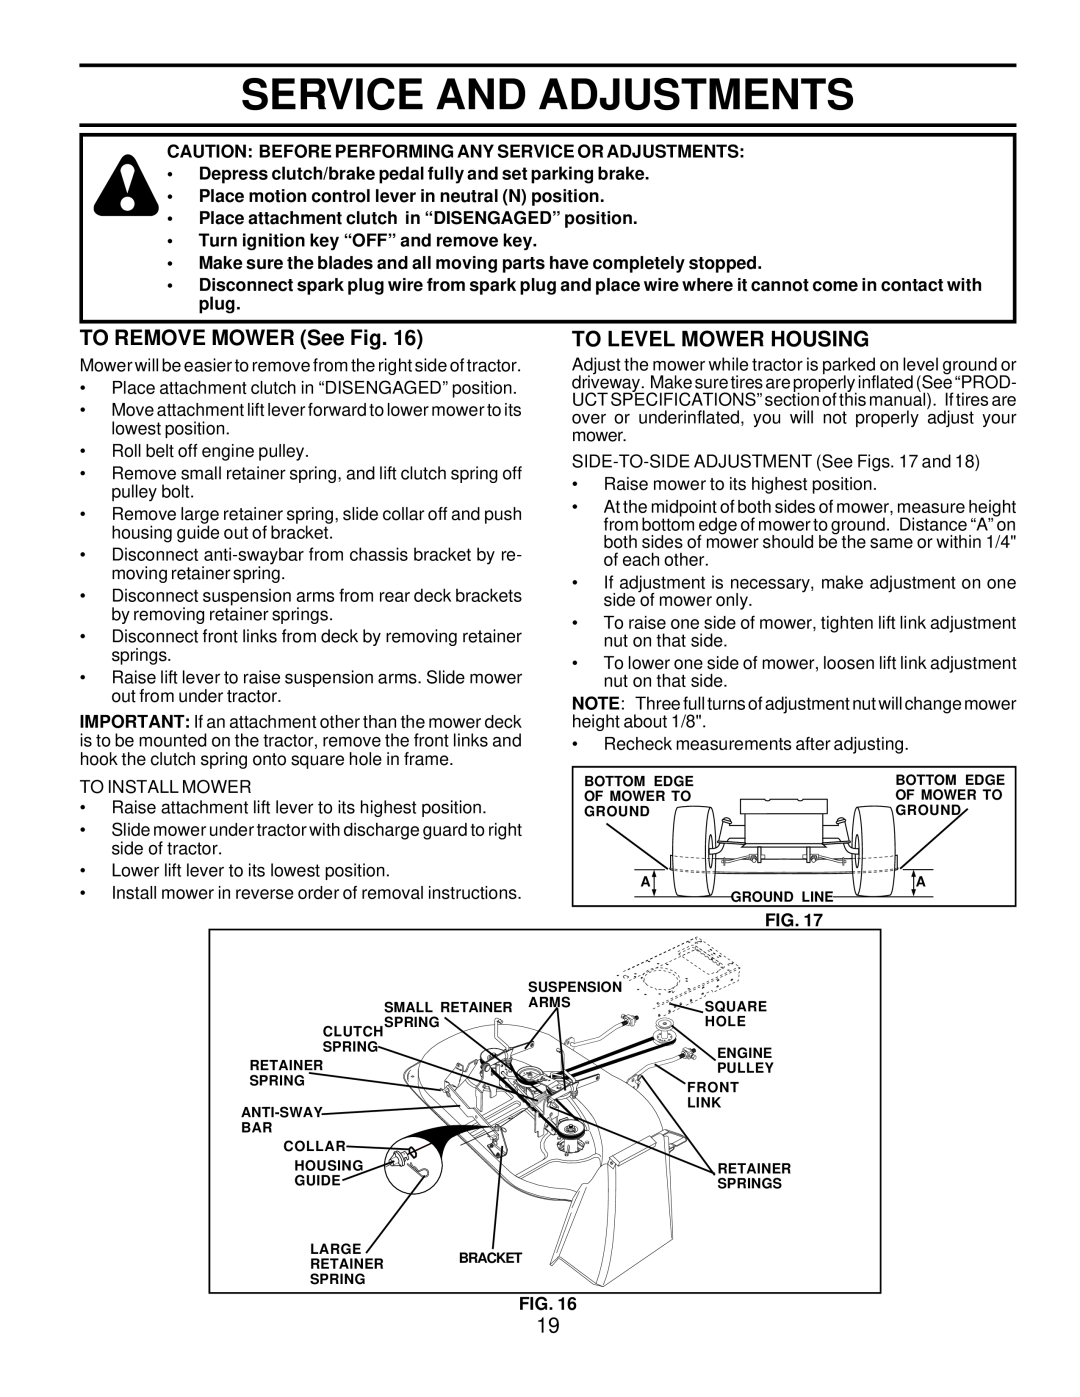 Husqvarna LTH120 owner manual Service And Adjustments, TO REMOVE MOWER See Fig, To Level Mower Housing 